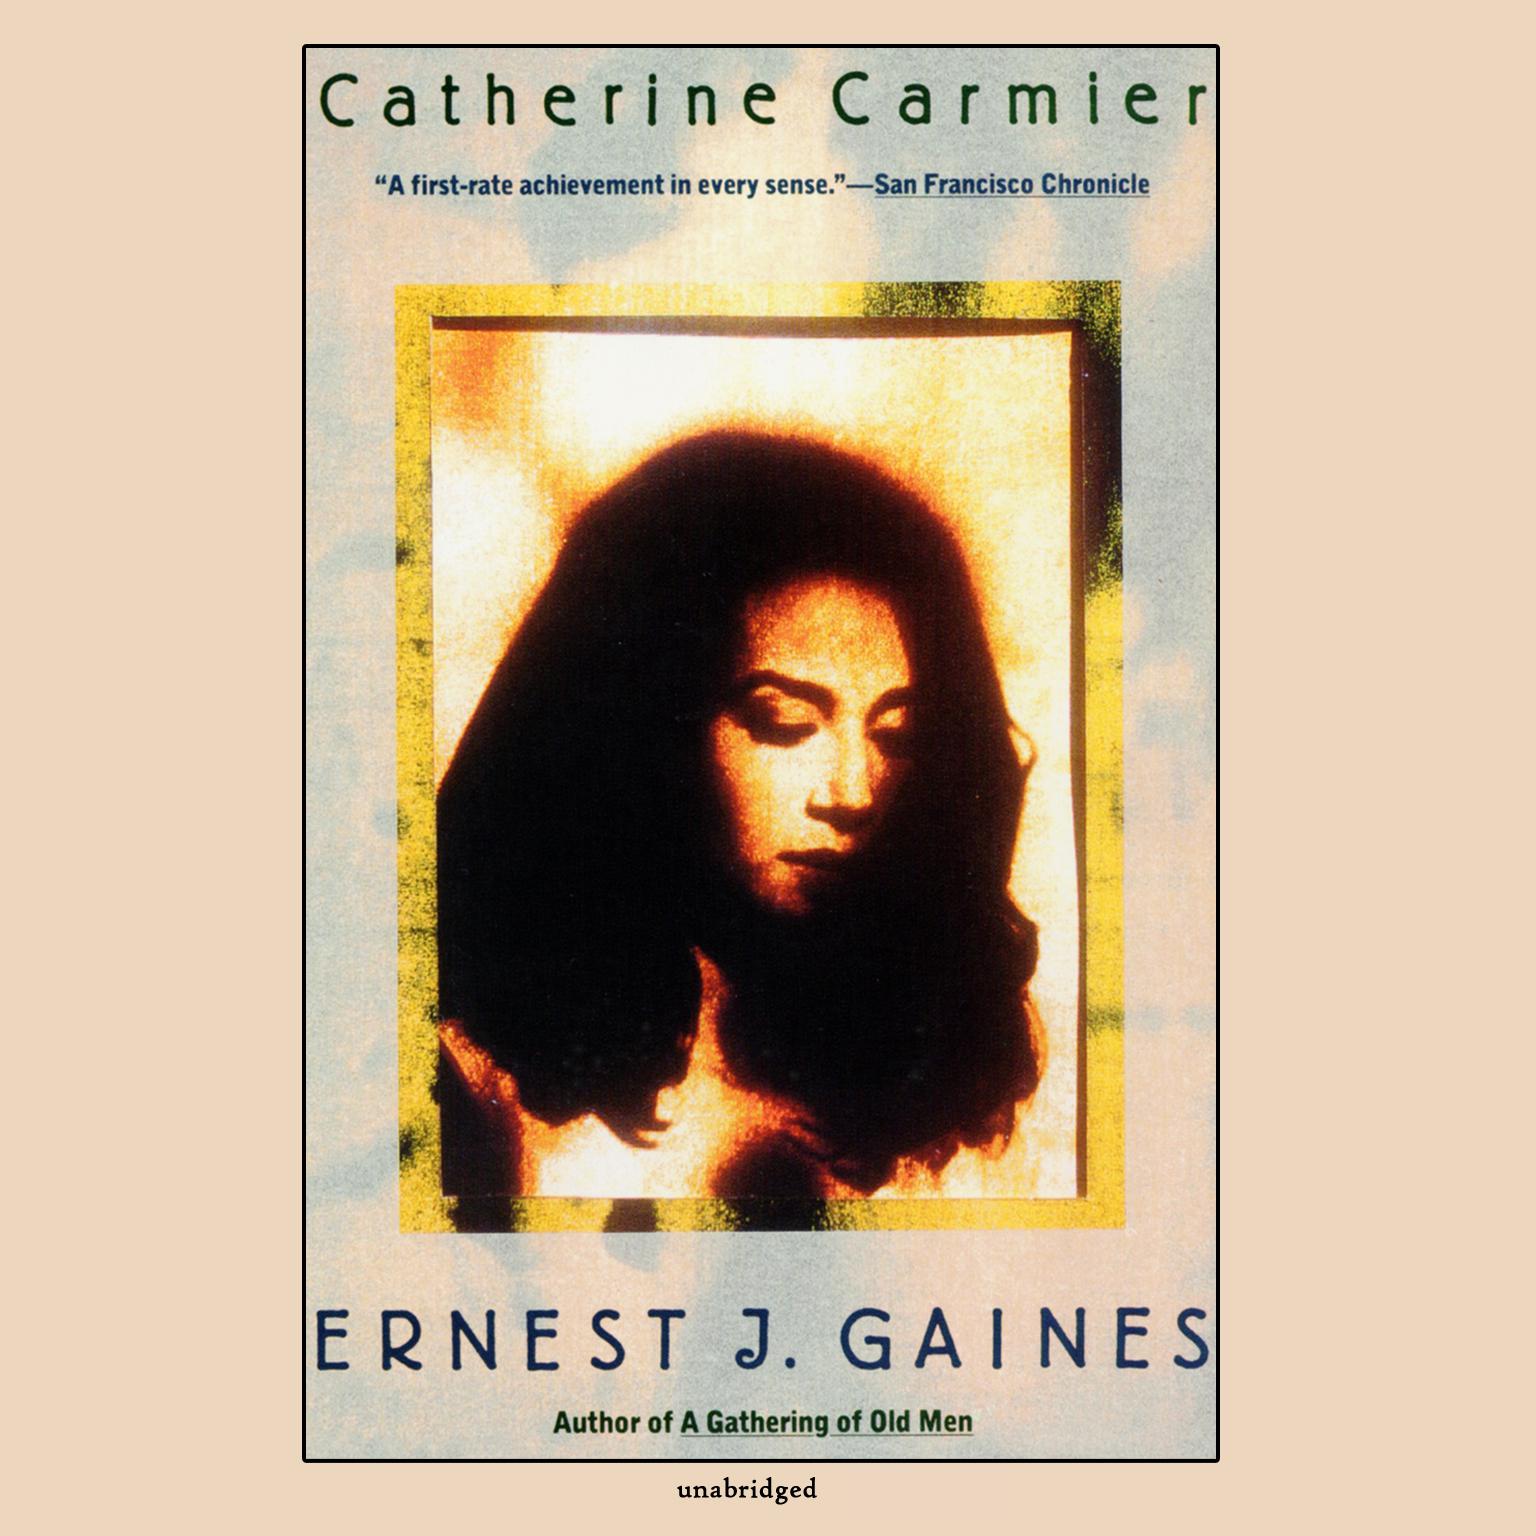 Catherine Carmier: A Novel Audiobook, by Ernest J. Gaines